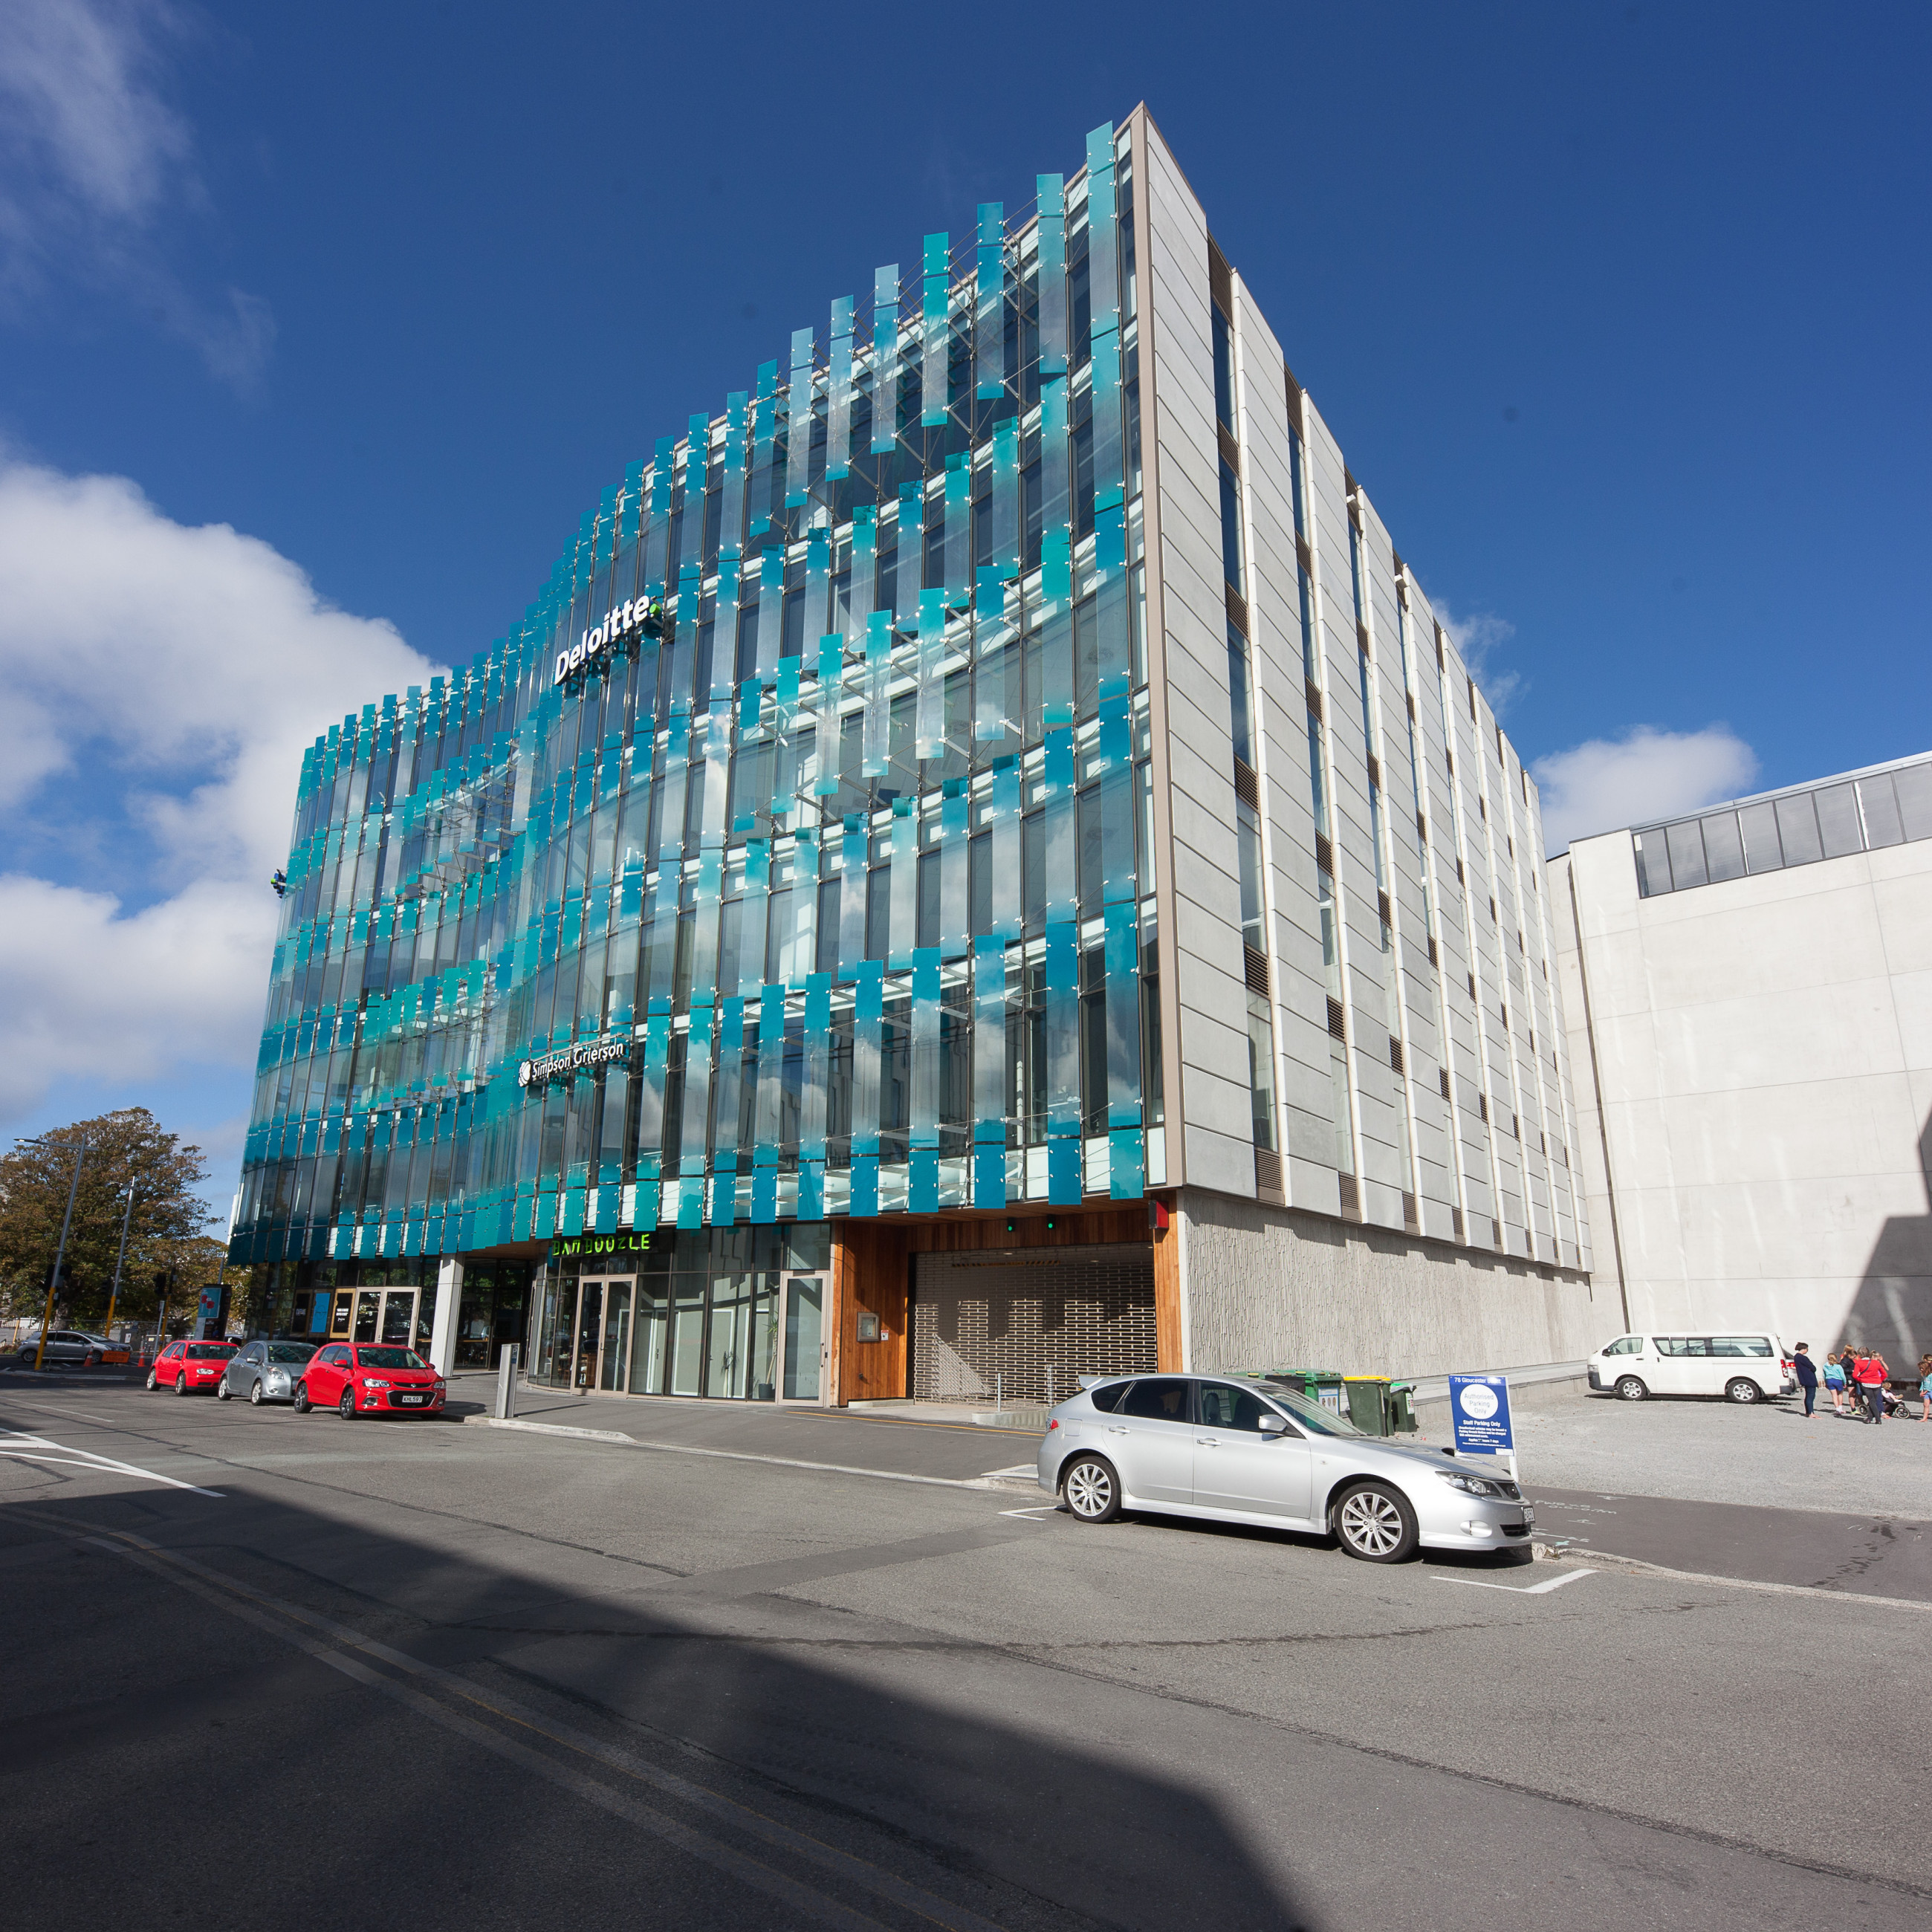 Urban building with a striking glass facade and highlighted detailing under clear blue skies